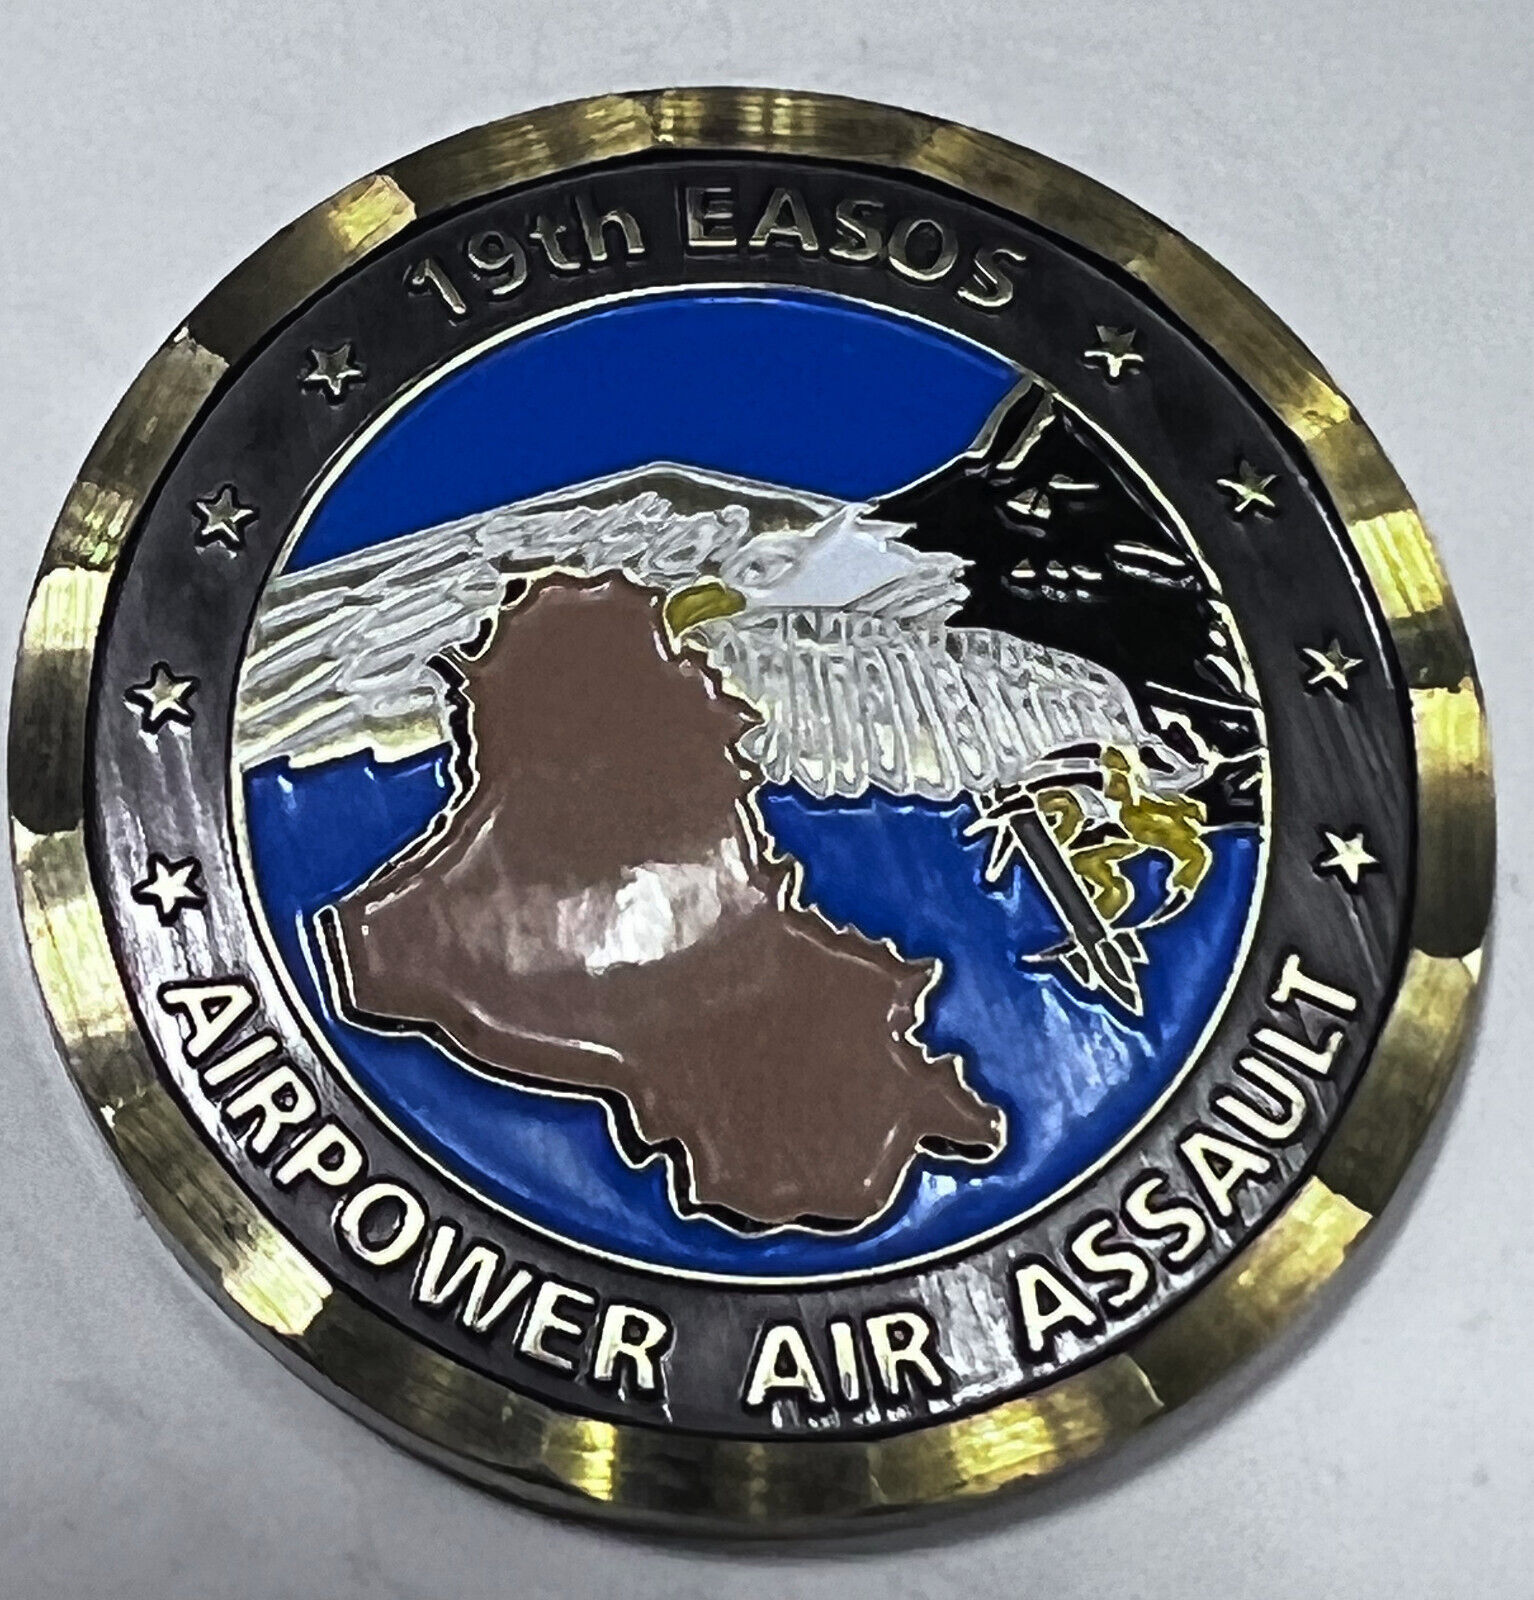 rare 19th Expeditionary Air Support Sq 101st Airborne Air Force Challenge Coin